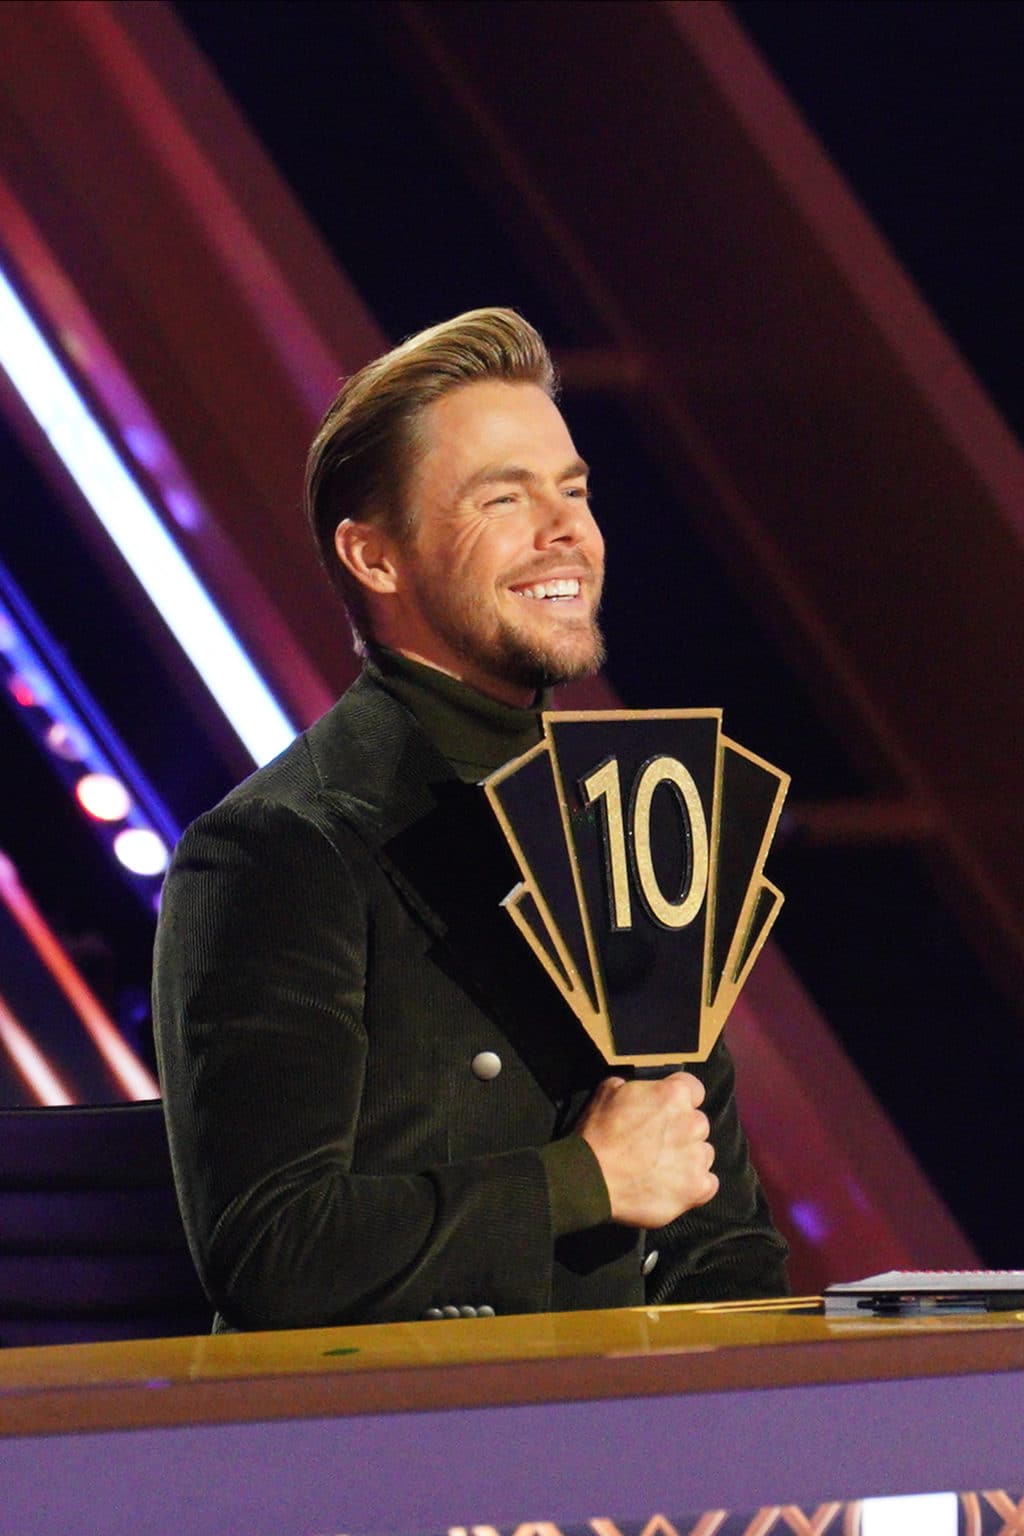 Dancing With The Stars Judge Derek Hough Diagnosed With COVID-19